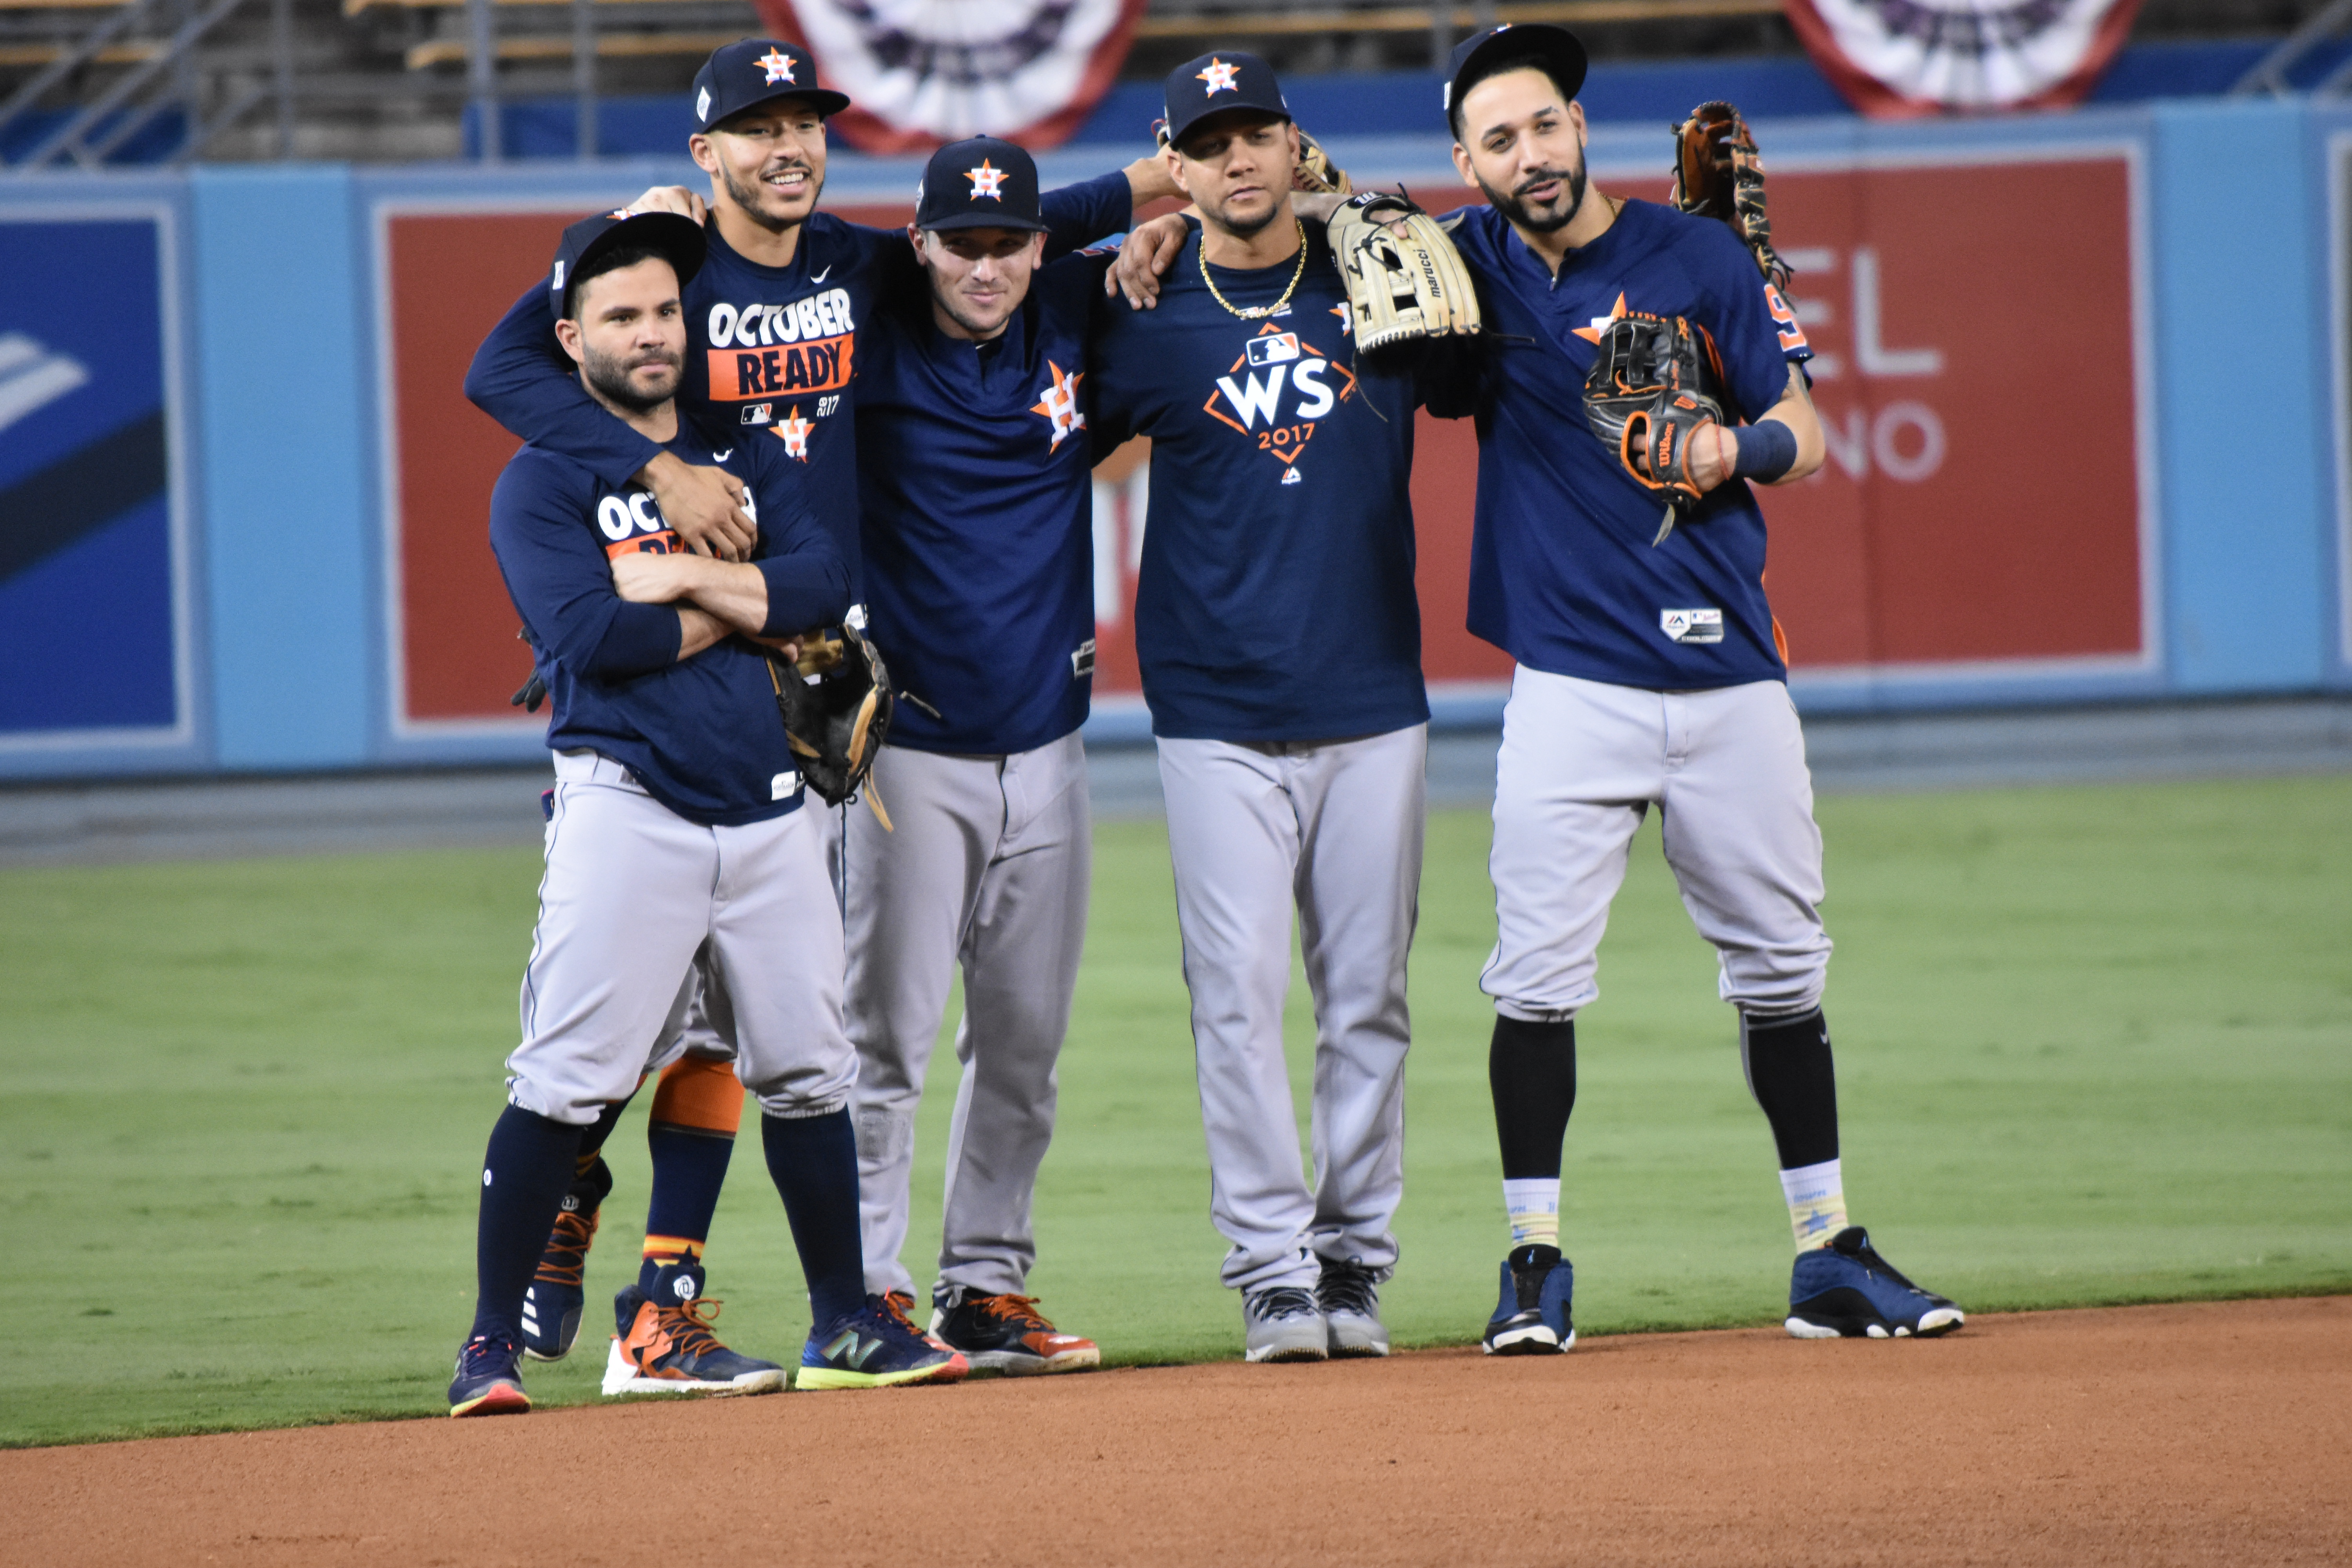 Brotherly bond: Astros' Jose Altuve, Carlos Correa inseparable on and off  field